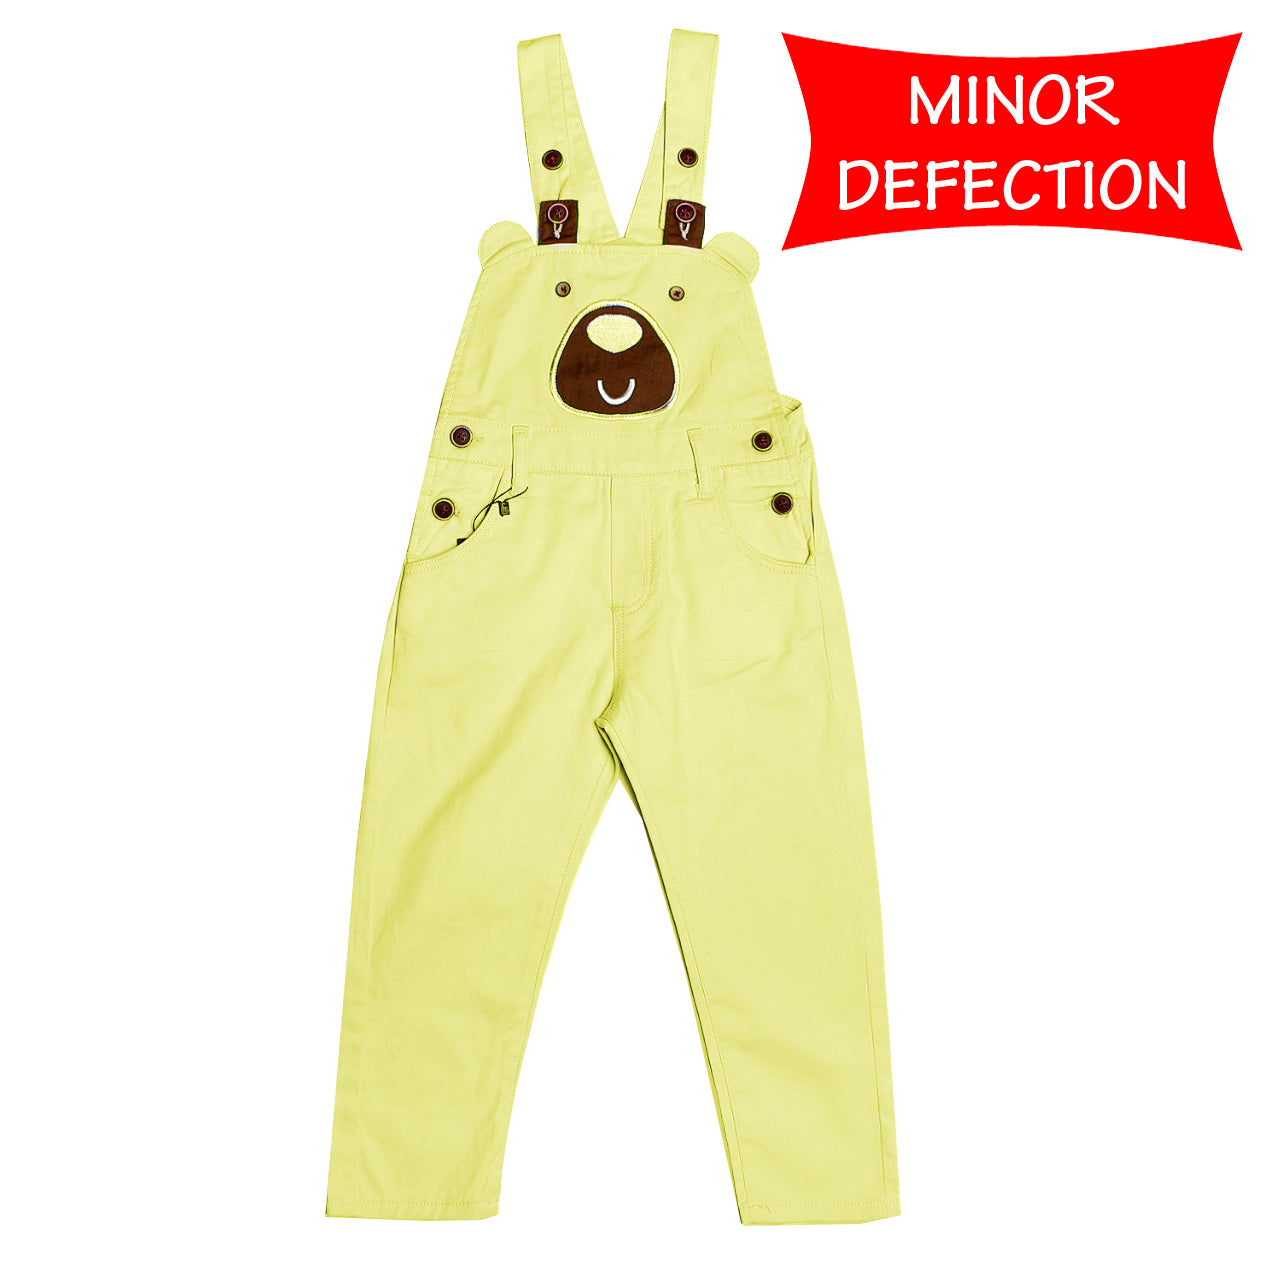 NEW YELLOW BEAR FACE DANGREE FOR UNISEX